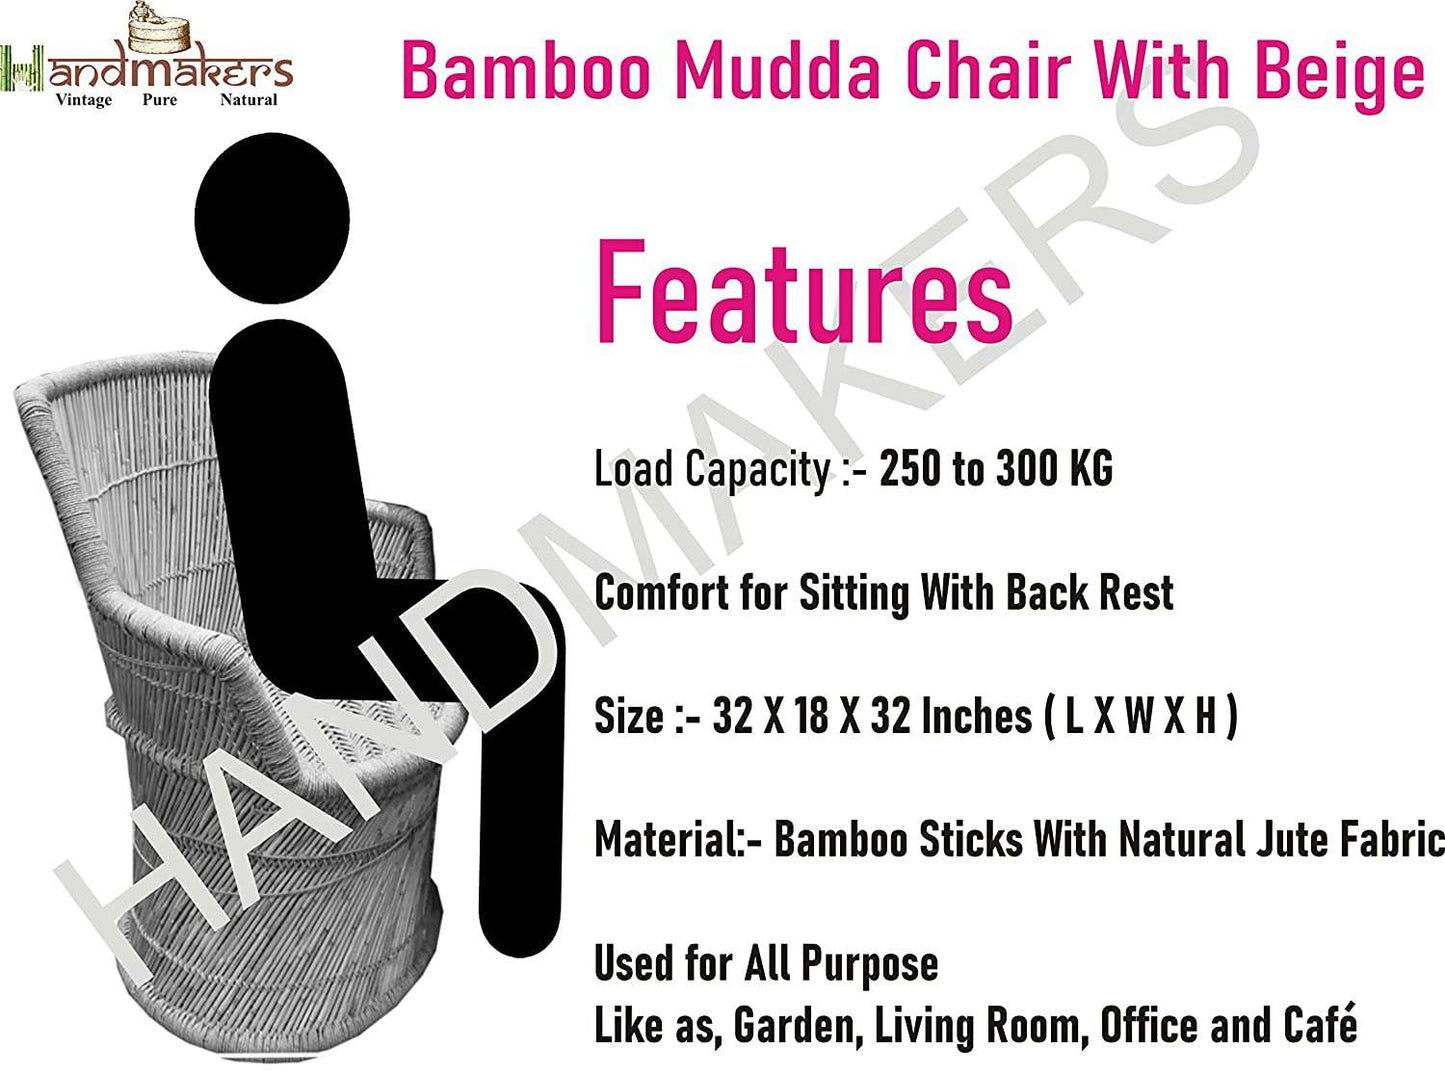 Natural Bamboo Mudda Chair With Beige